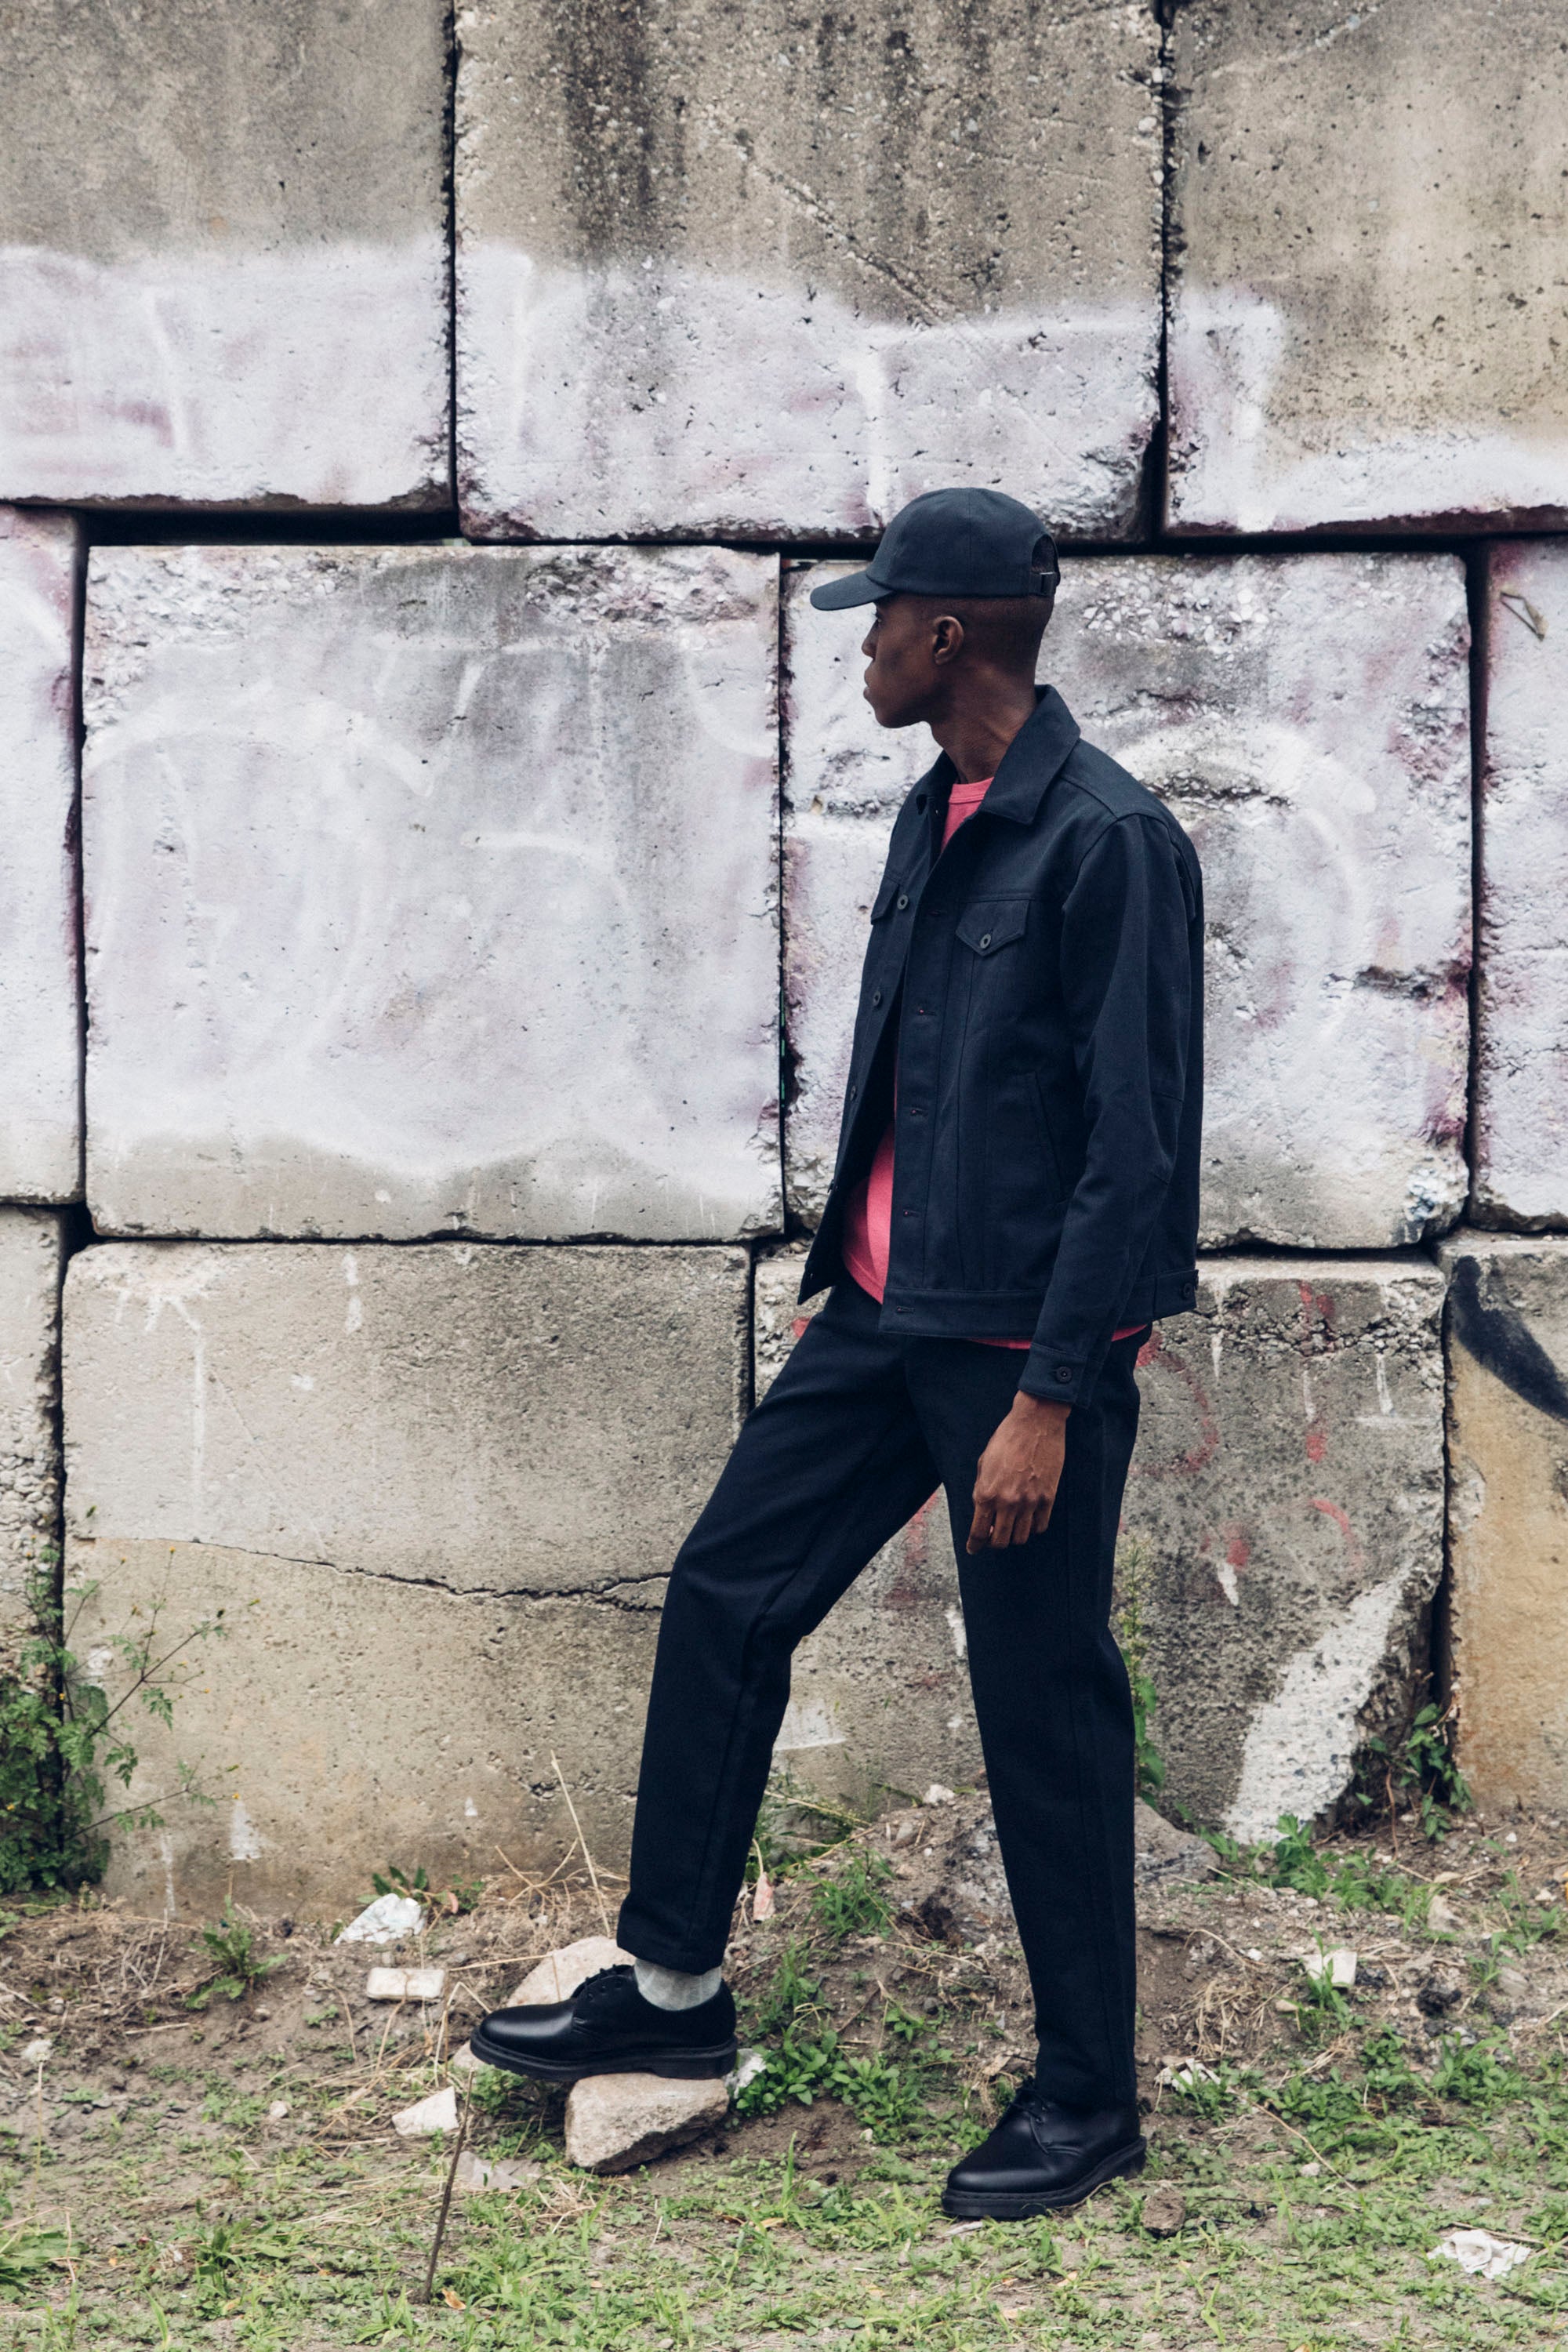 Edem in the Washed Black Duckworks with a Duckcap and a Duckcloth Shank Jacket, outdoors in front of concrete blocks